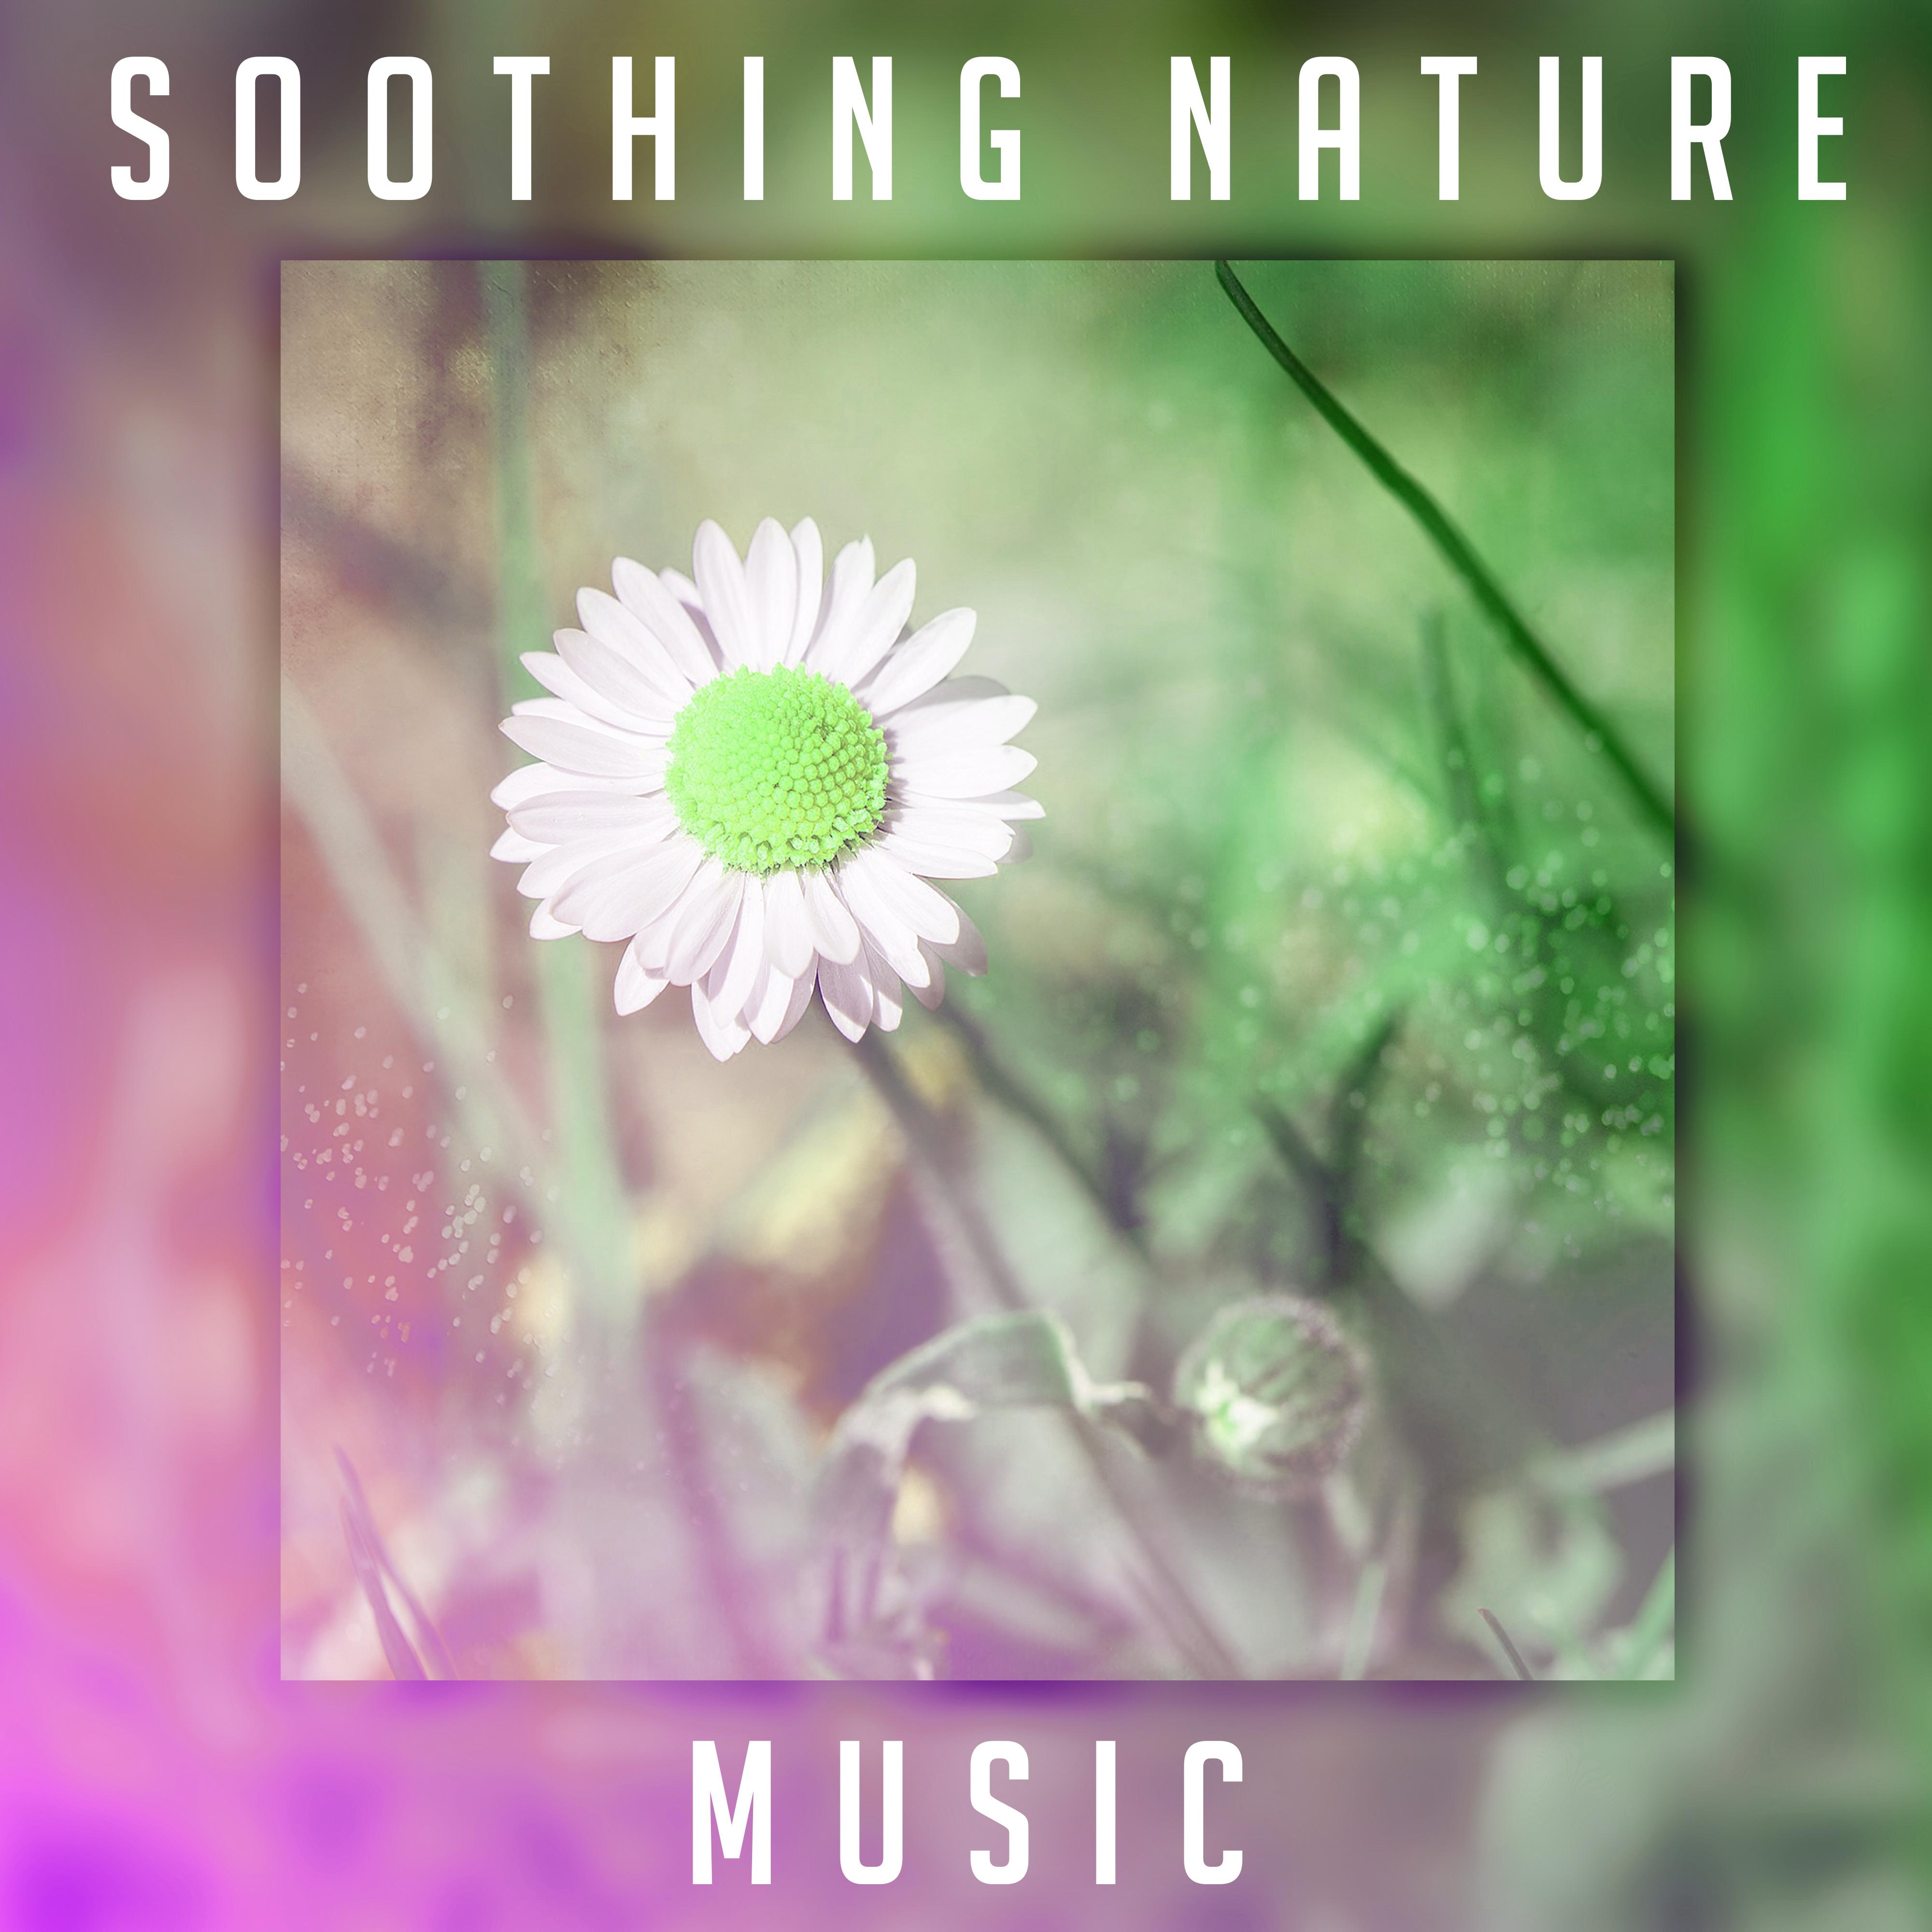 Soothing Nature Music  Calm Down  Relax, Rest with New Age Sounds, Nature Waves, Healing Therapy